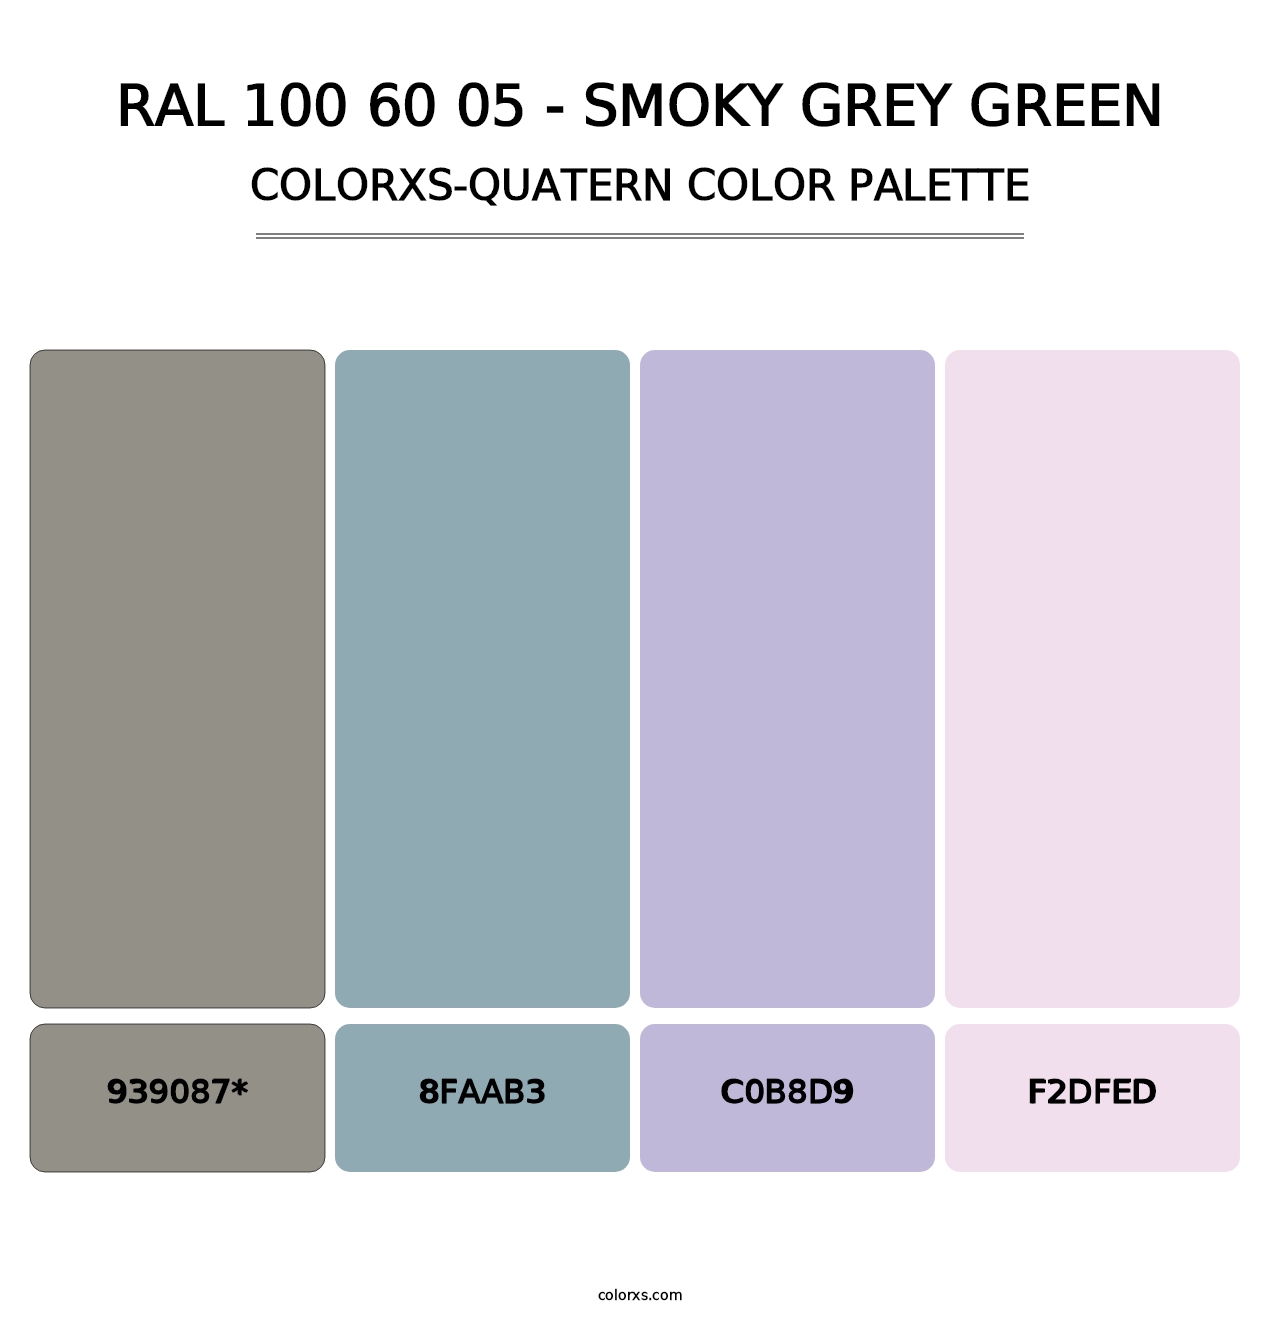 RAL 100 60 05 - Smoky Grey Green - Colorxs Quatern Palette